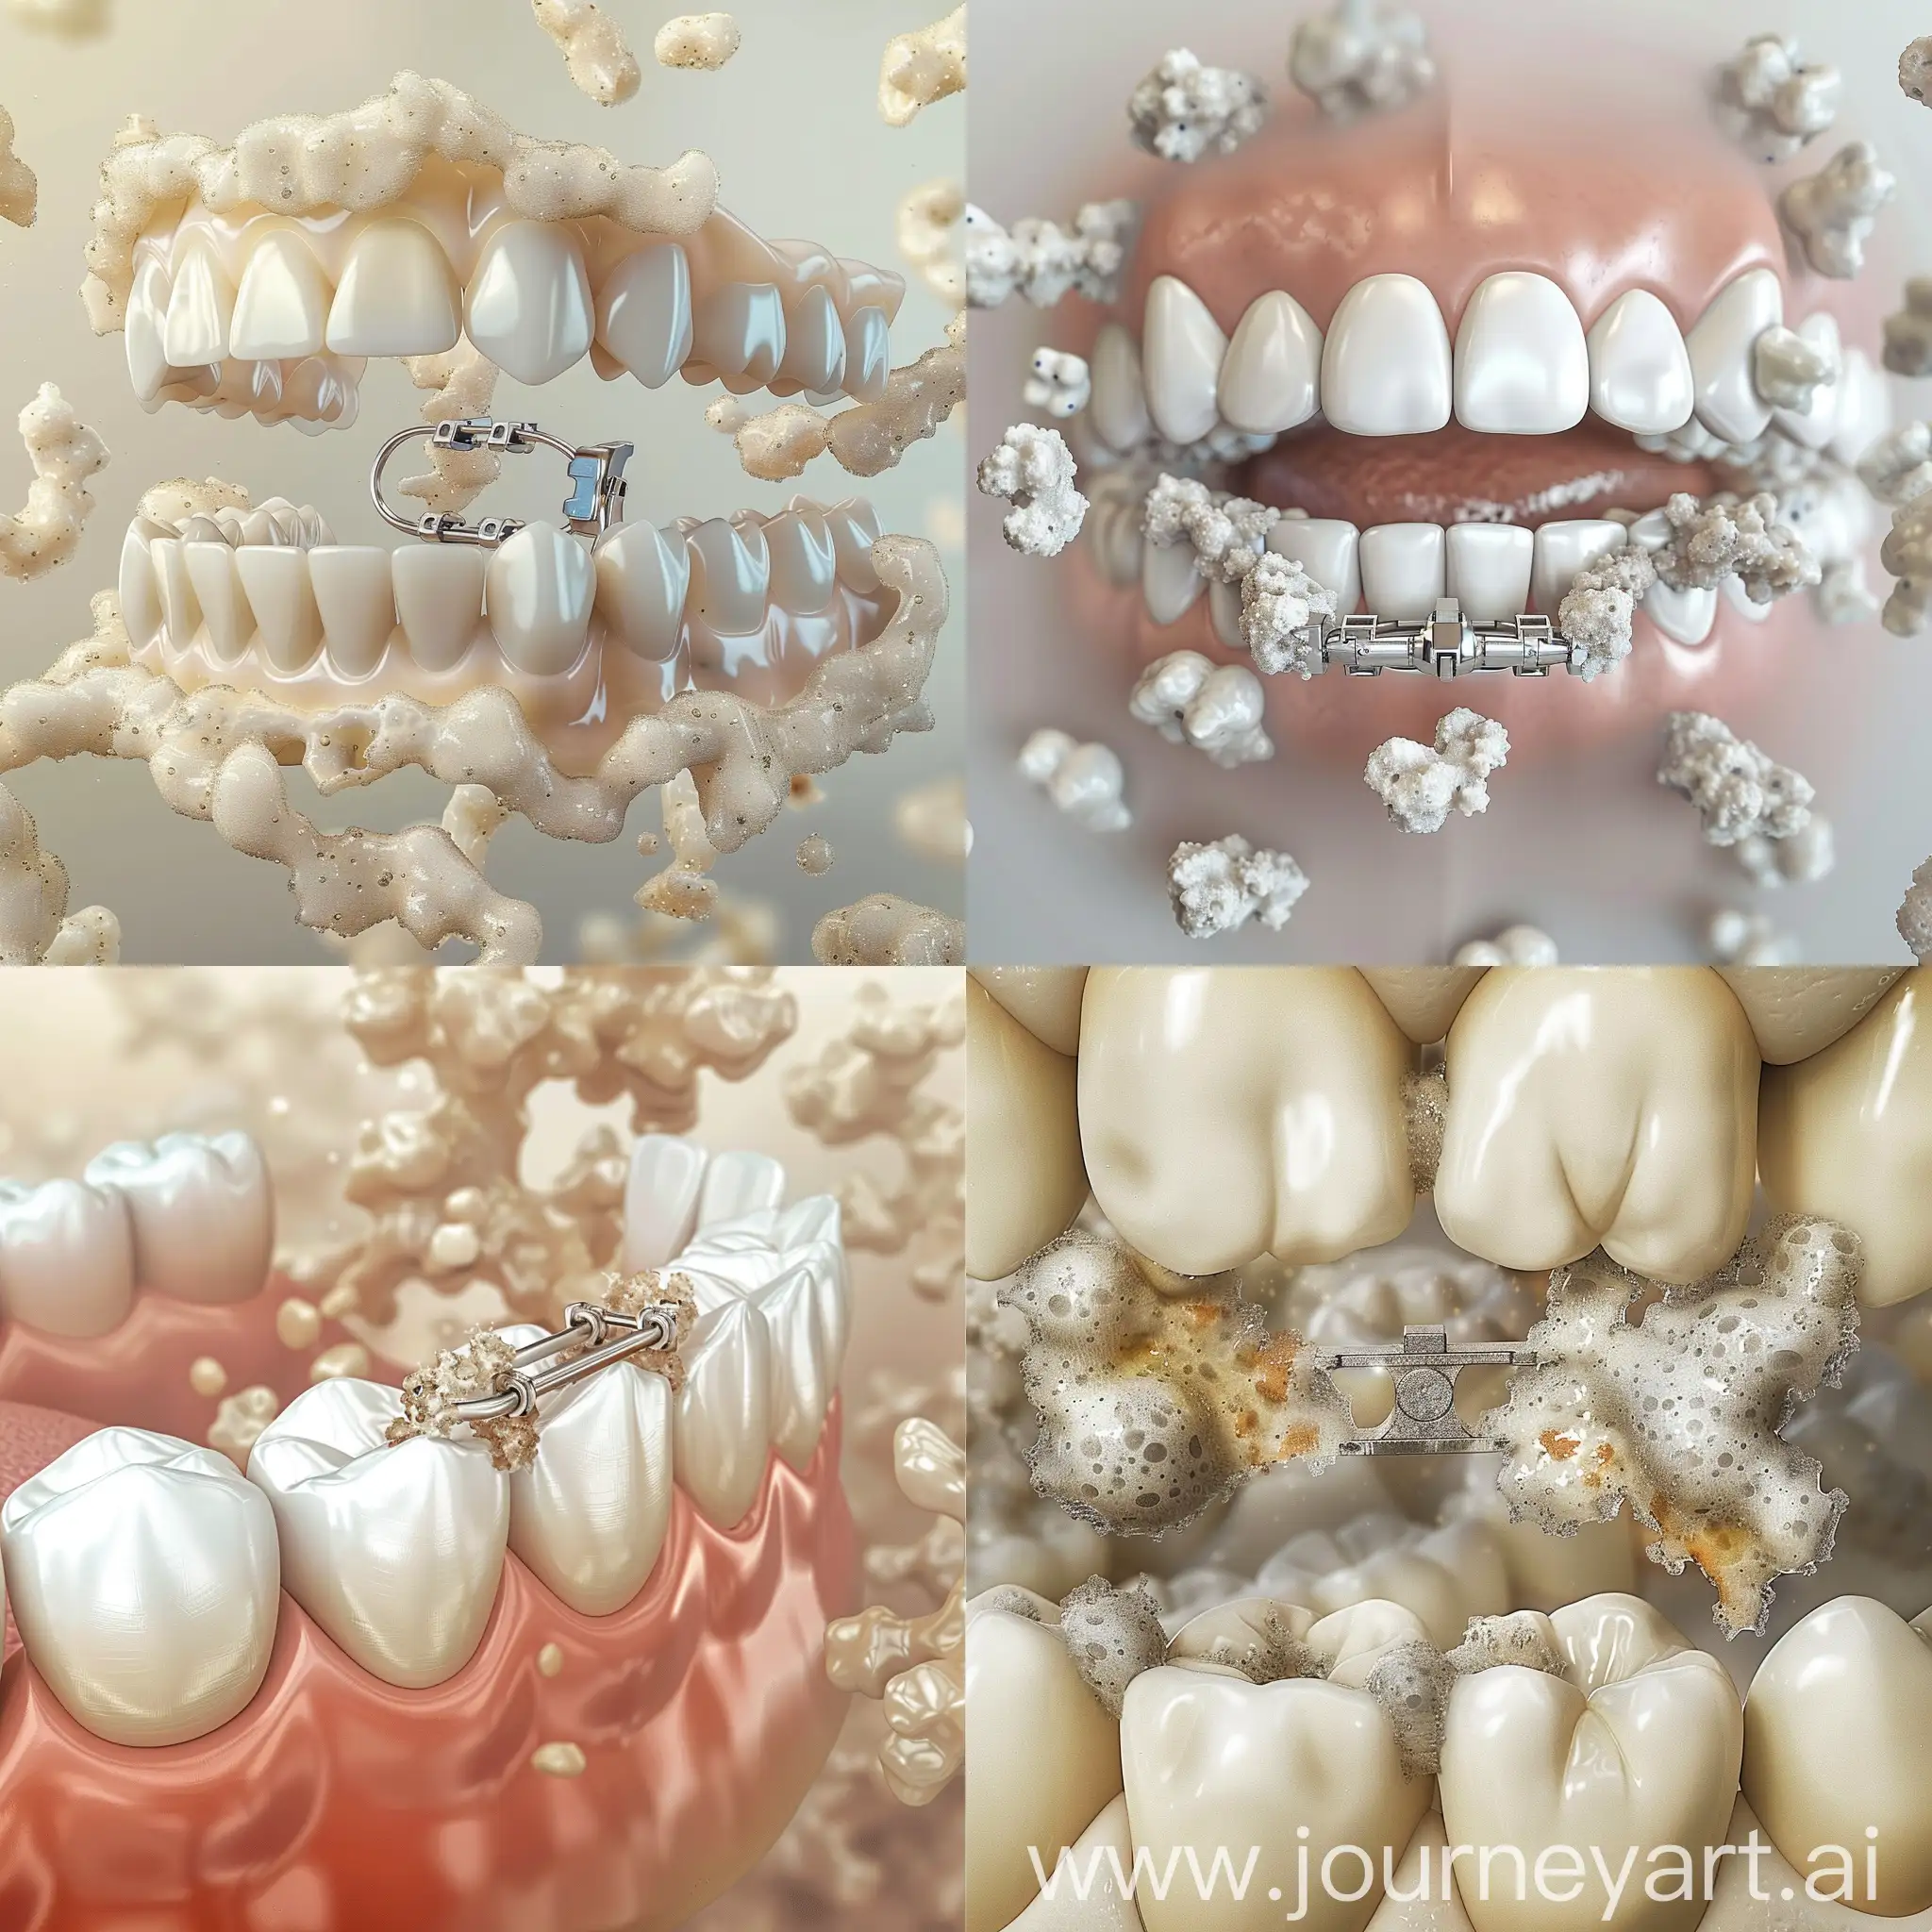 Fixed-Orthodontic-Bracket-Surrounded-by-Dental-Calculus